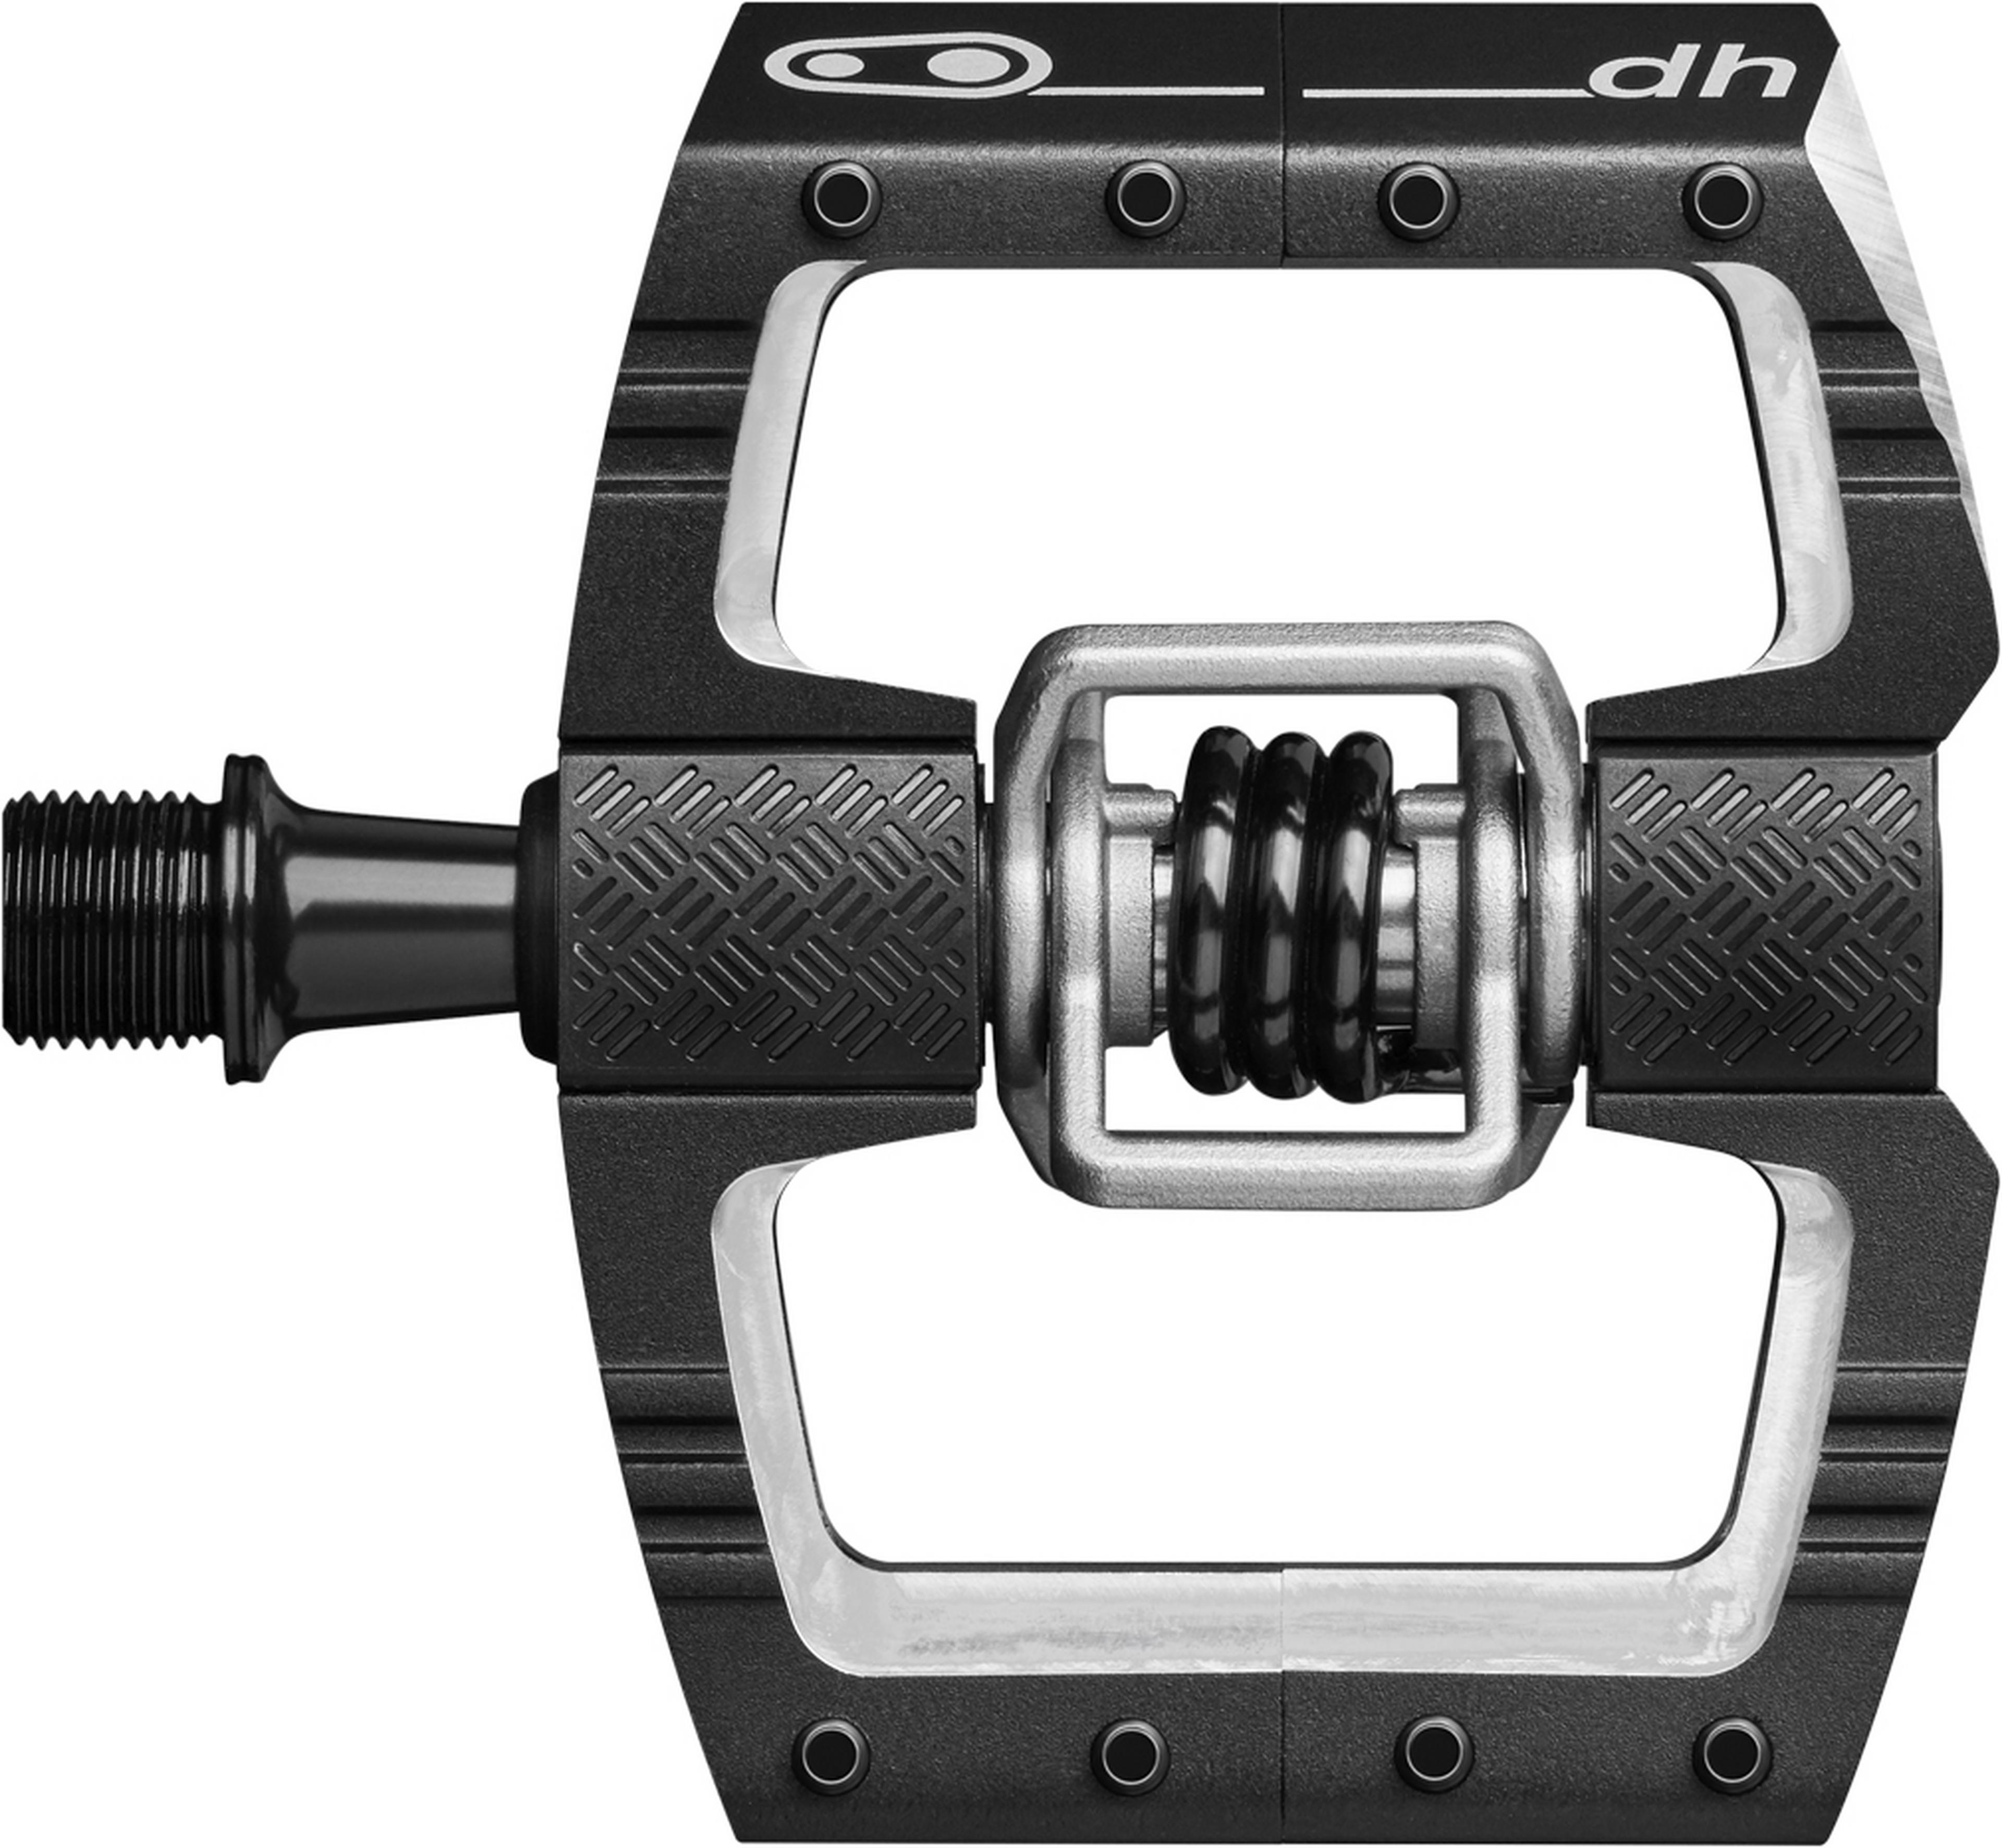 crankbrothers Mallet MTB Clipless Pedals